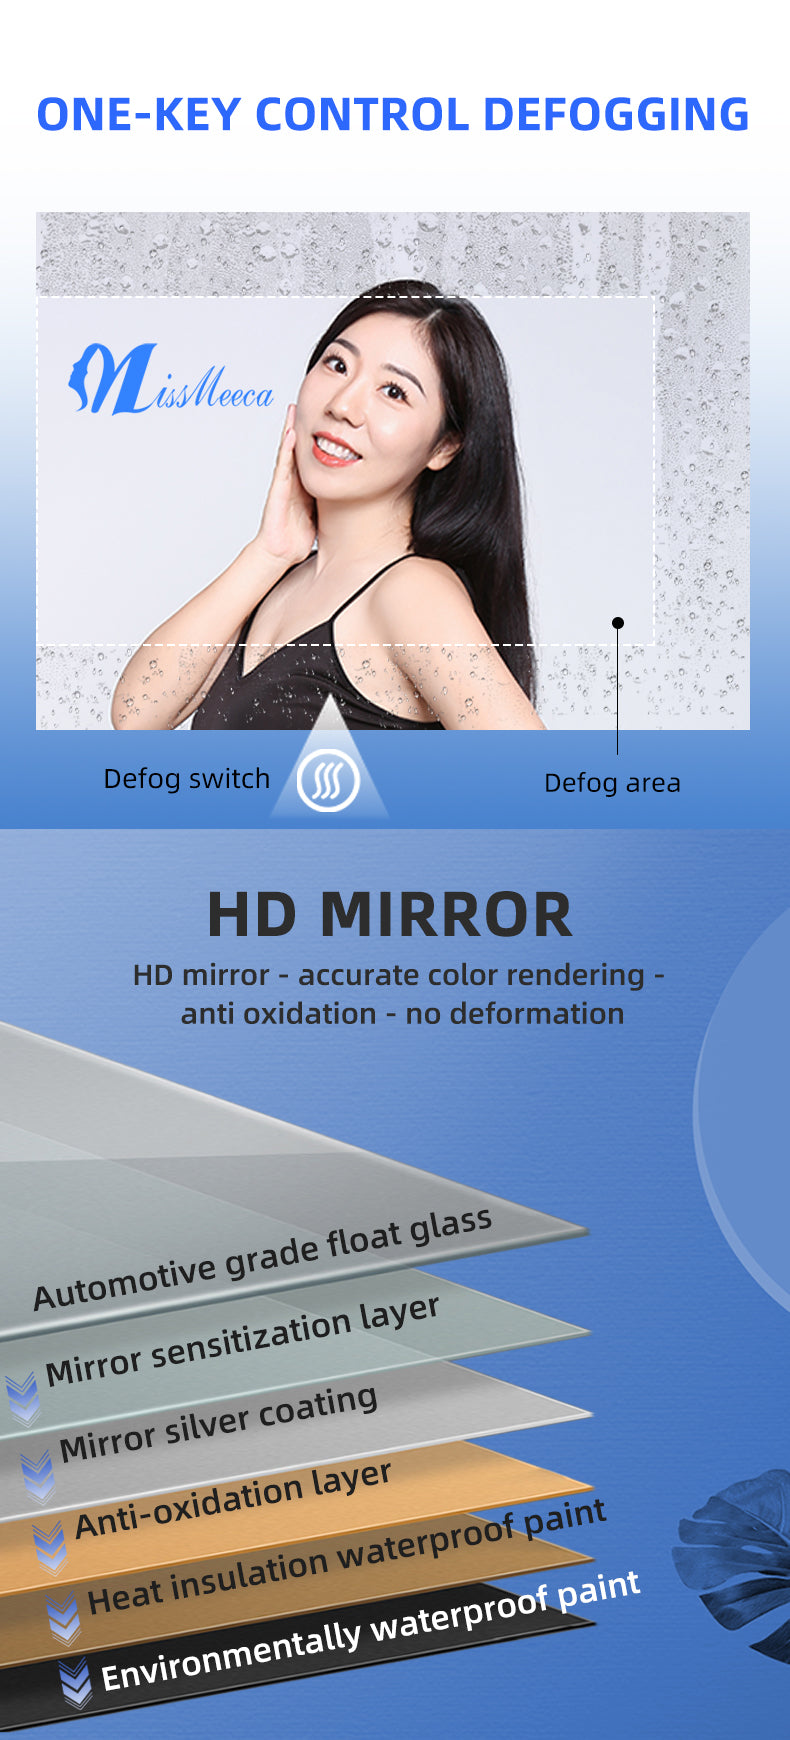 LED Mirror for Bathroom Lighted Vanity Mirrors Adjustable 3 Color Dimmable Vanity Mirror with Lights Anti-Fog Touch Control Wall